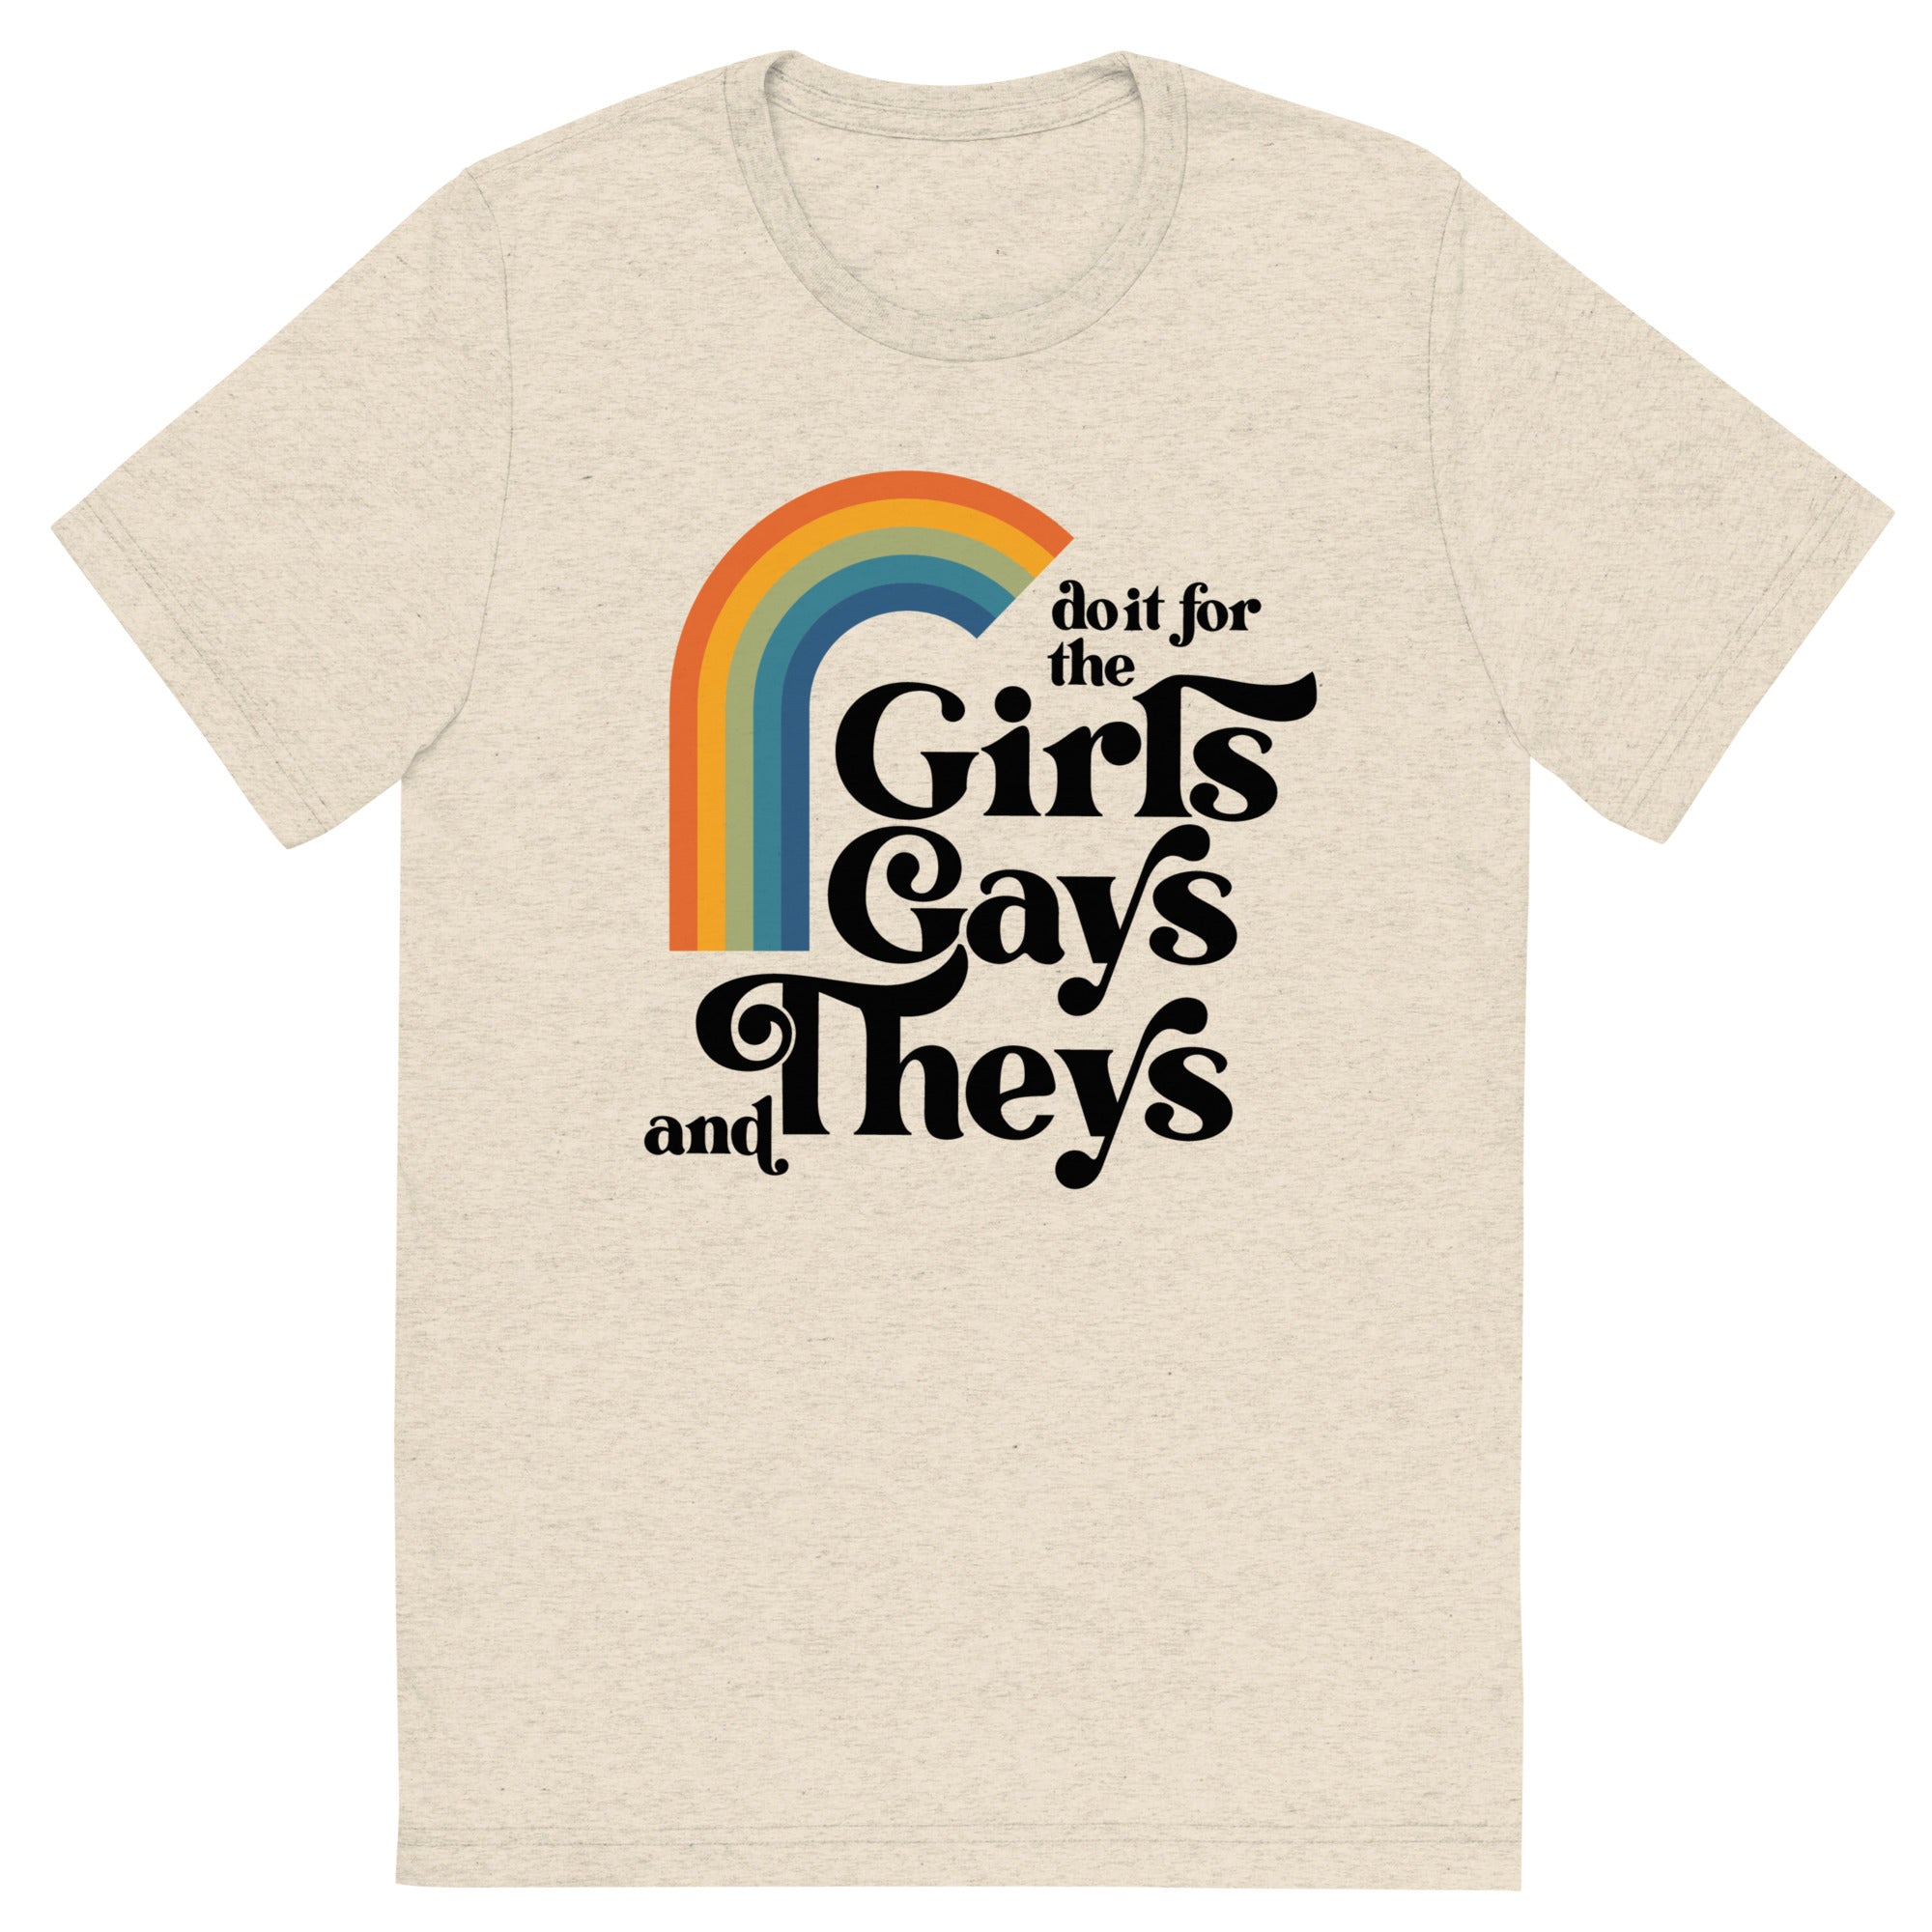 Do It For the Girls, Gays & Theys - Retro Tee